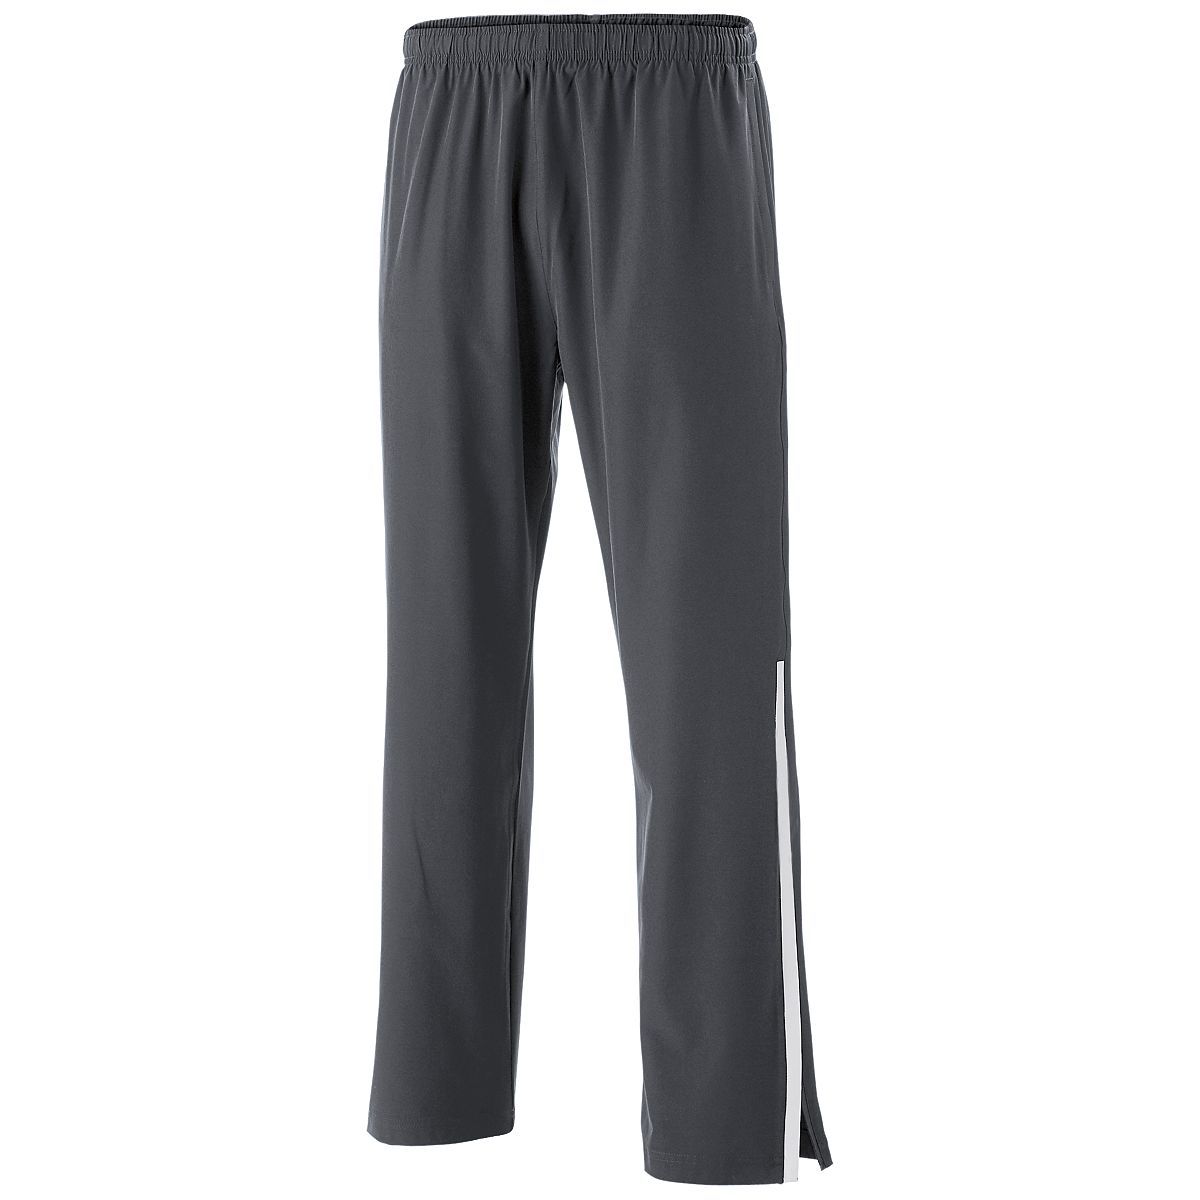 Holloway Weld Pant in Carbon/White  -Part of the Adult, Adult-Pants, Pants, Holloway, Weld-Collection product lines at KanaleyCreations.com